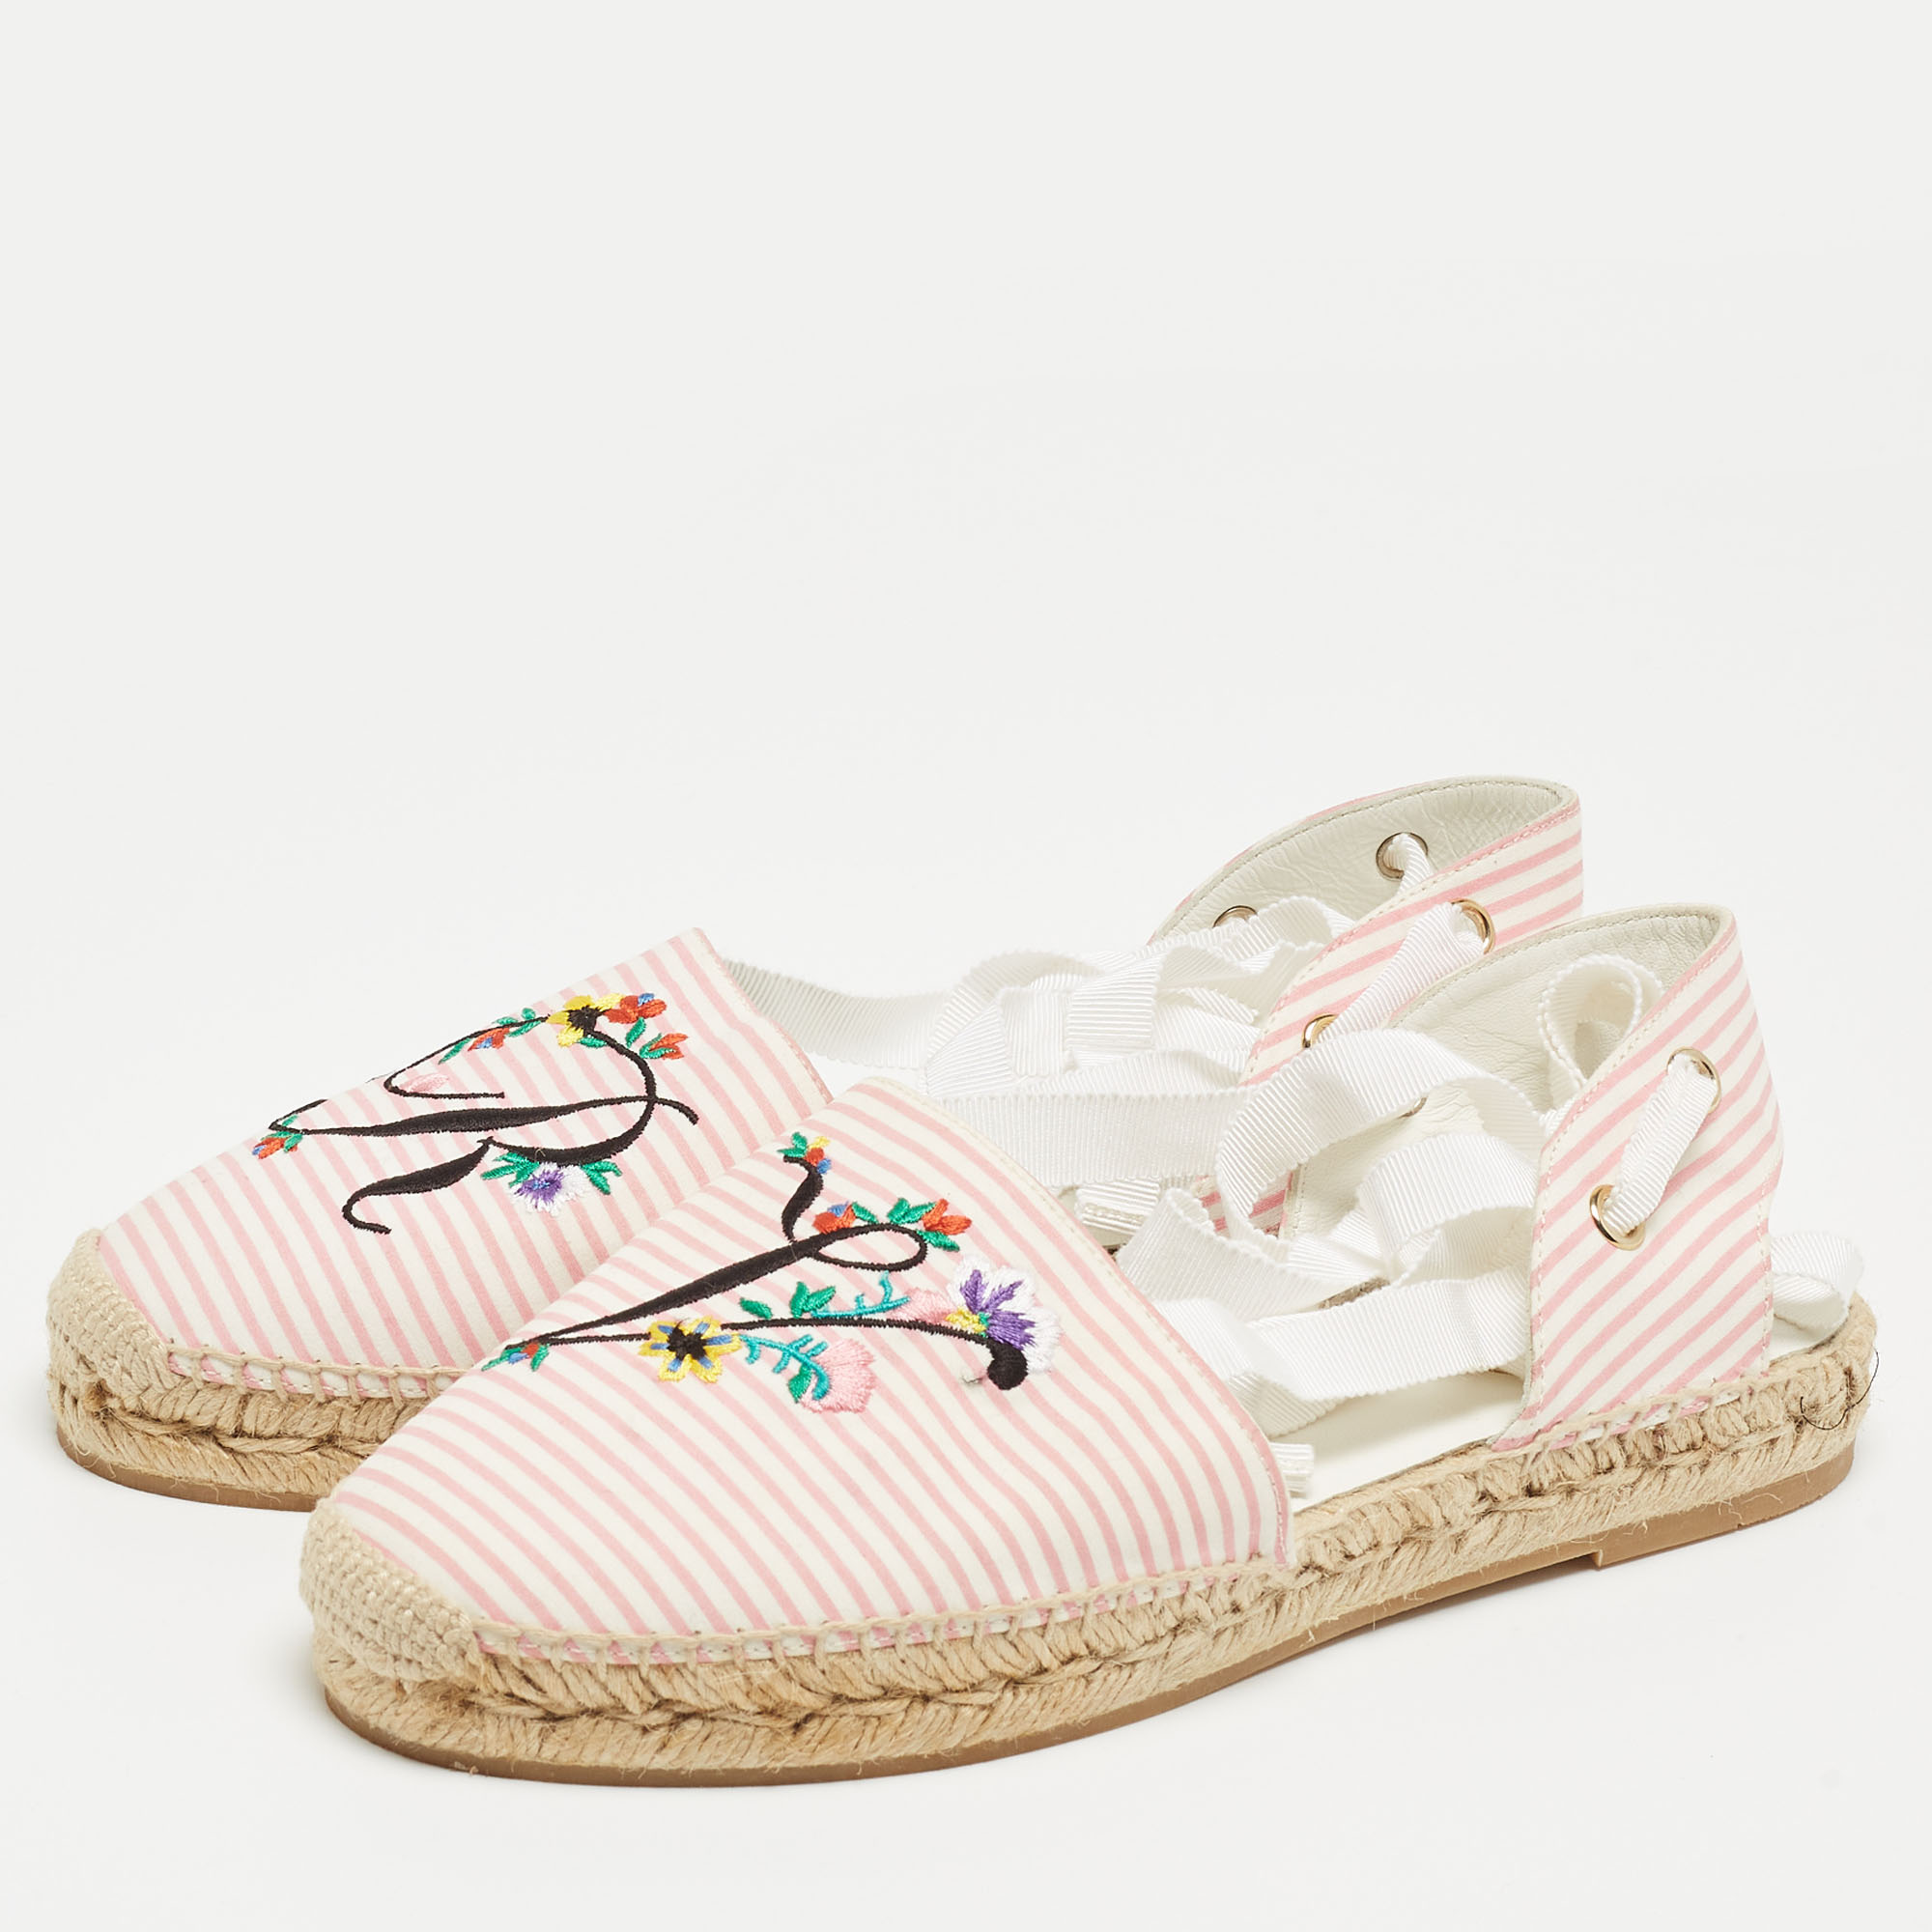 

Roger Vivier Pink/White Striped Fabric Floral Embroidered Ankle Tie Espadrille Flats Size